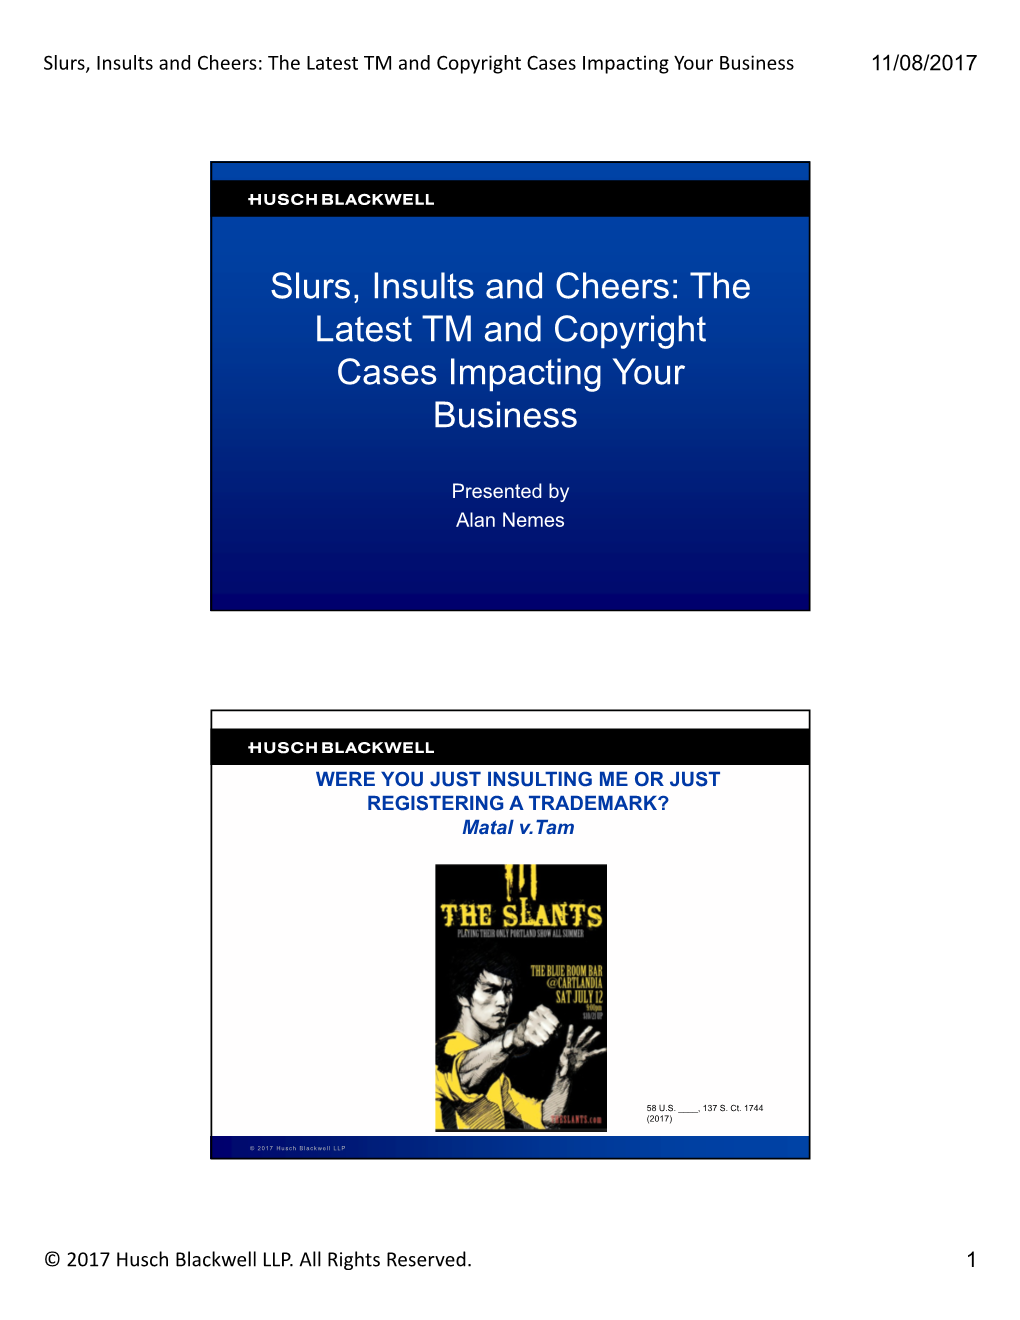 Slurs, Insults and Cheers: the Latest TM and Copyright Cases Impacting Your Business 11/08/2017